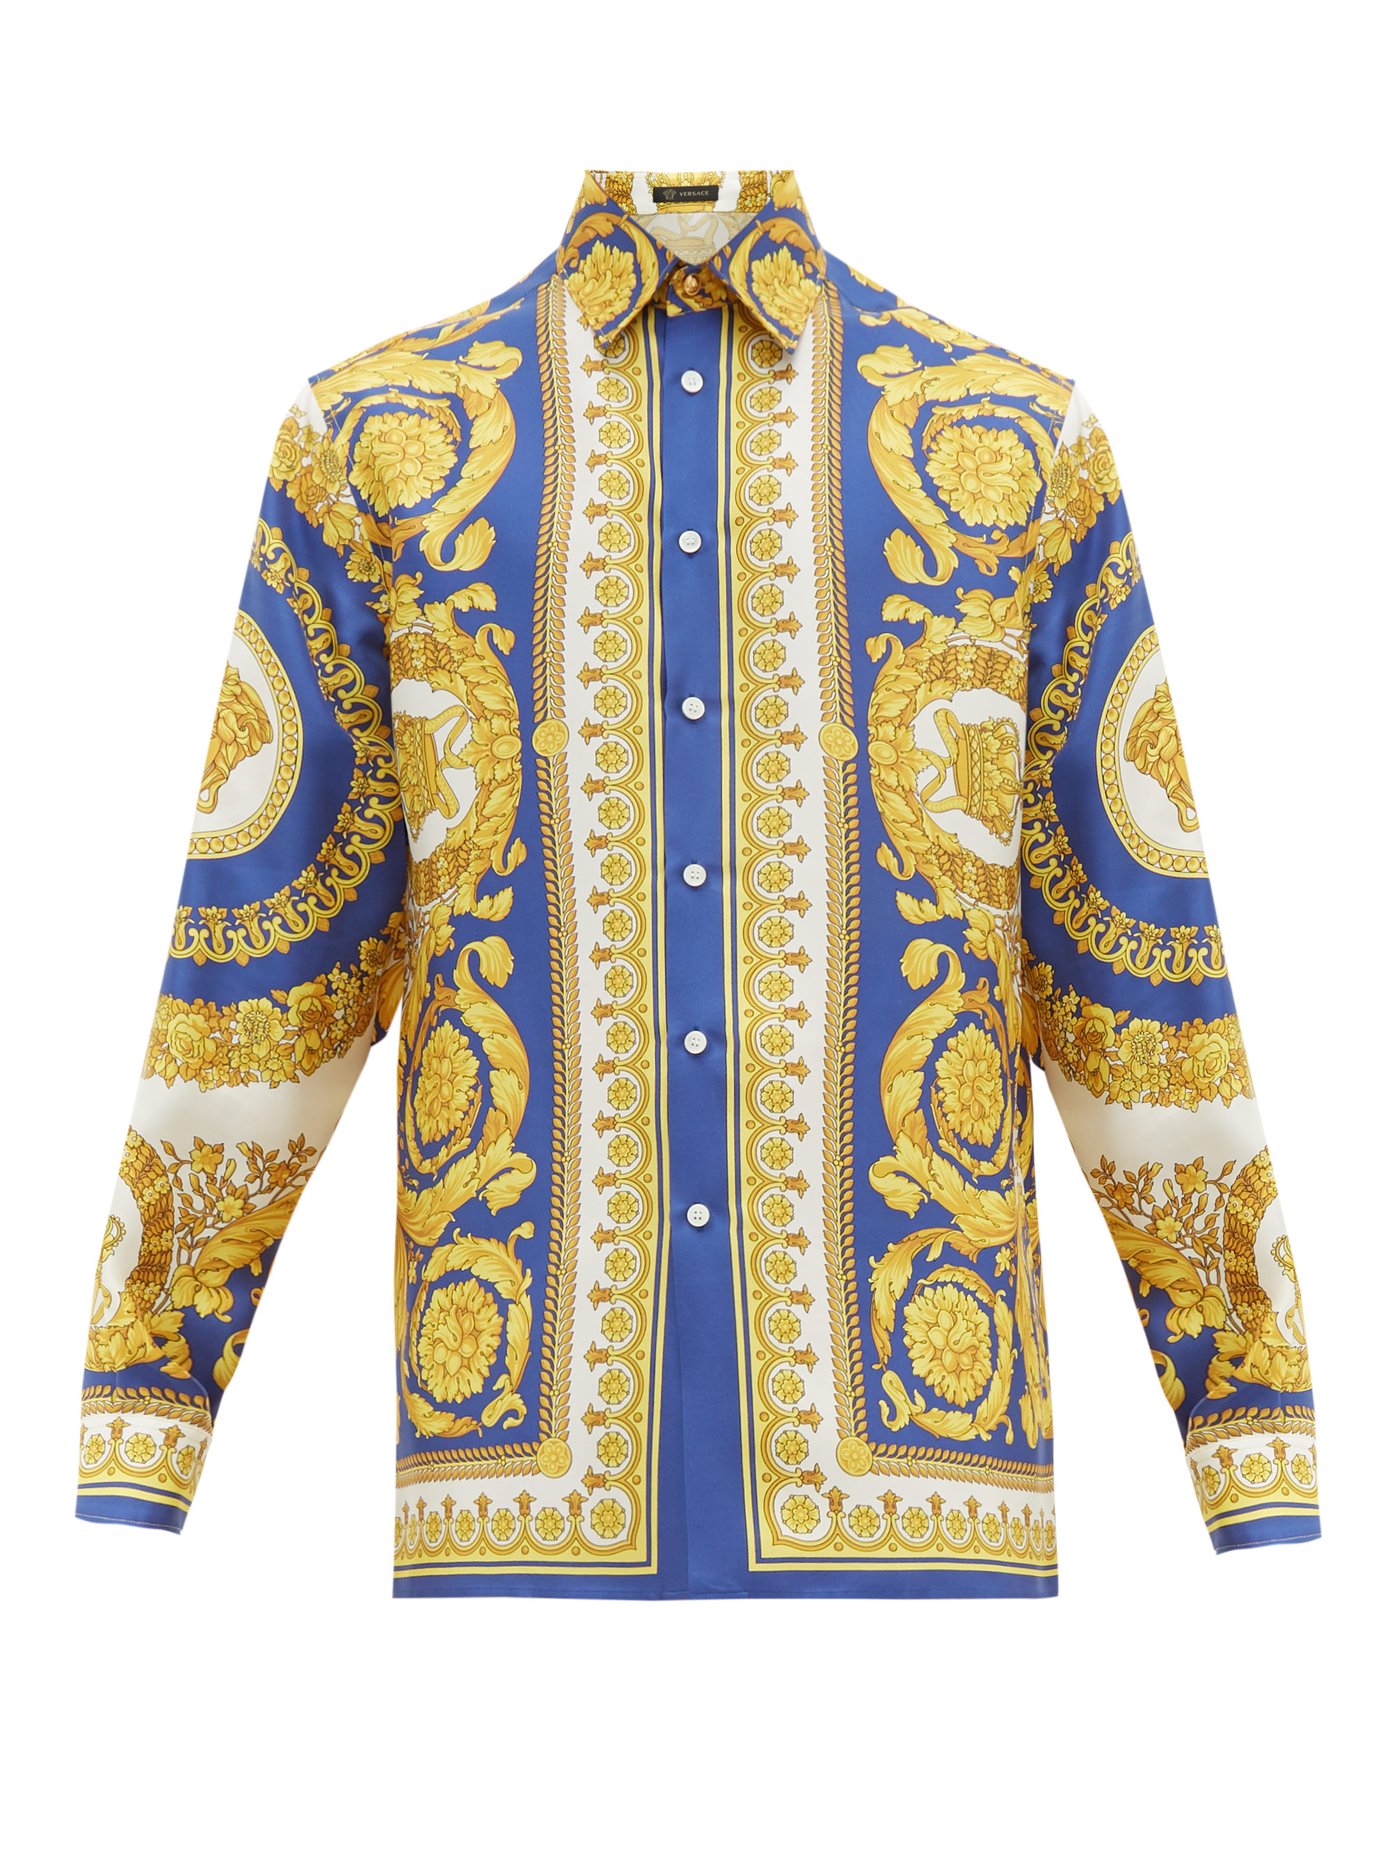 versace inspired print blouse